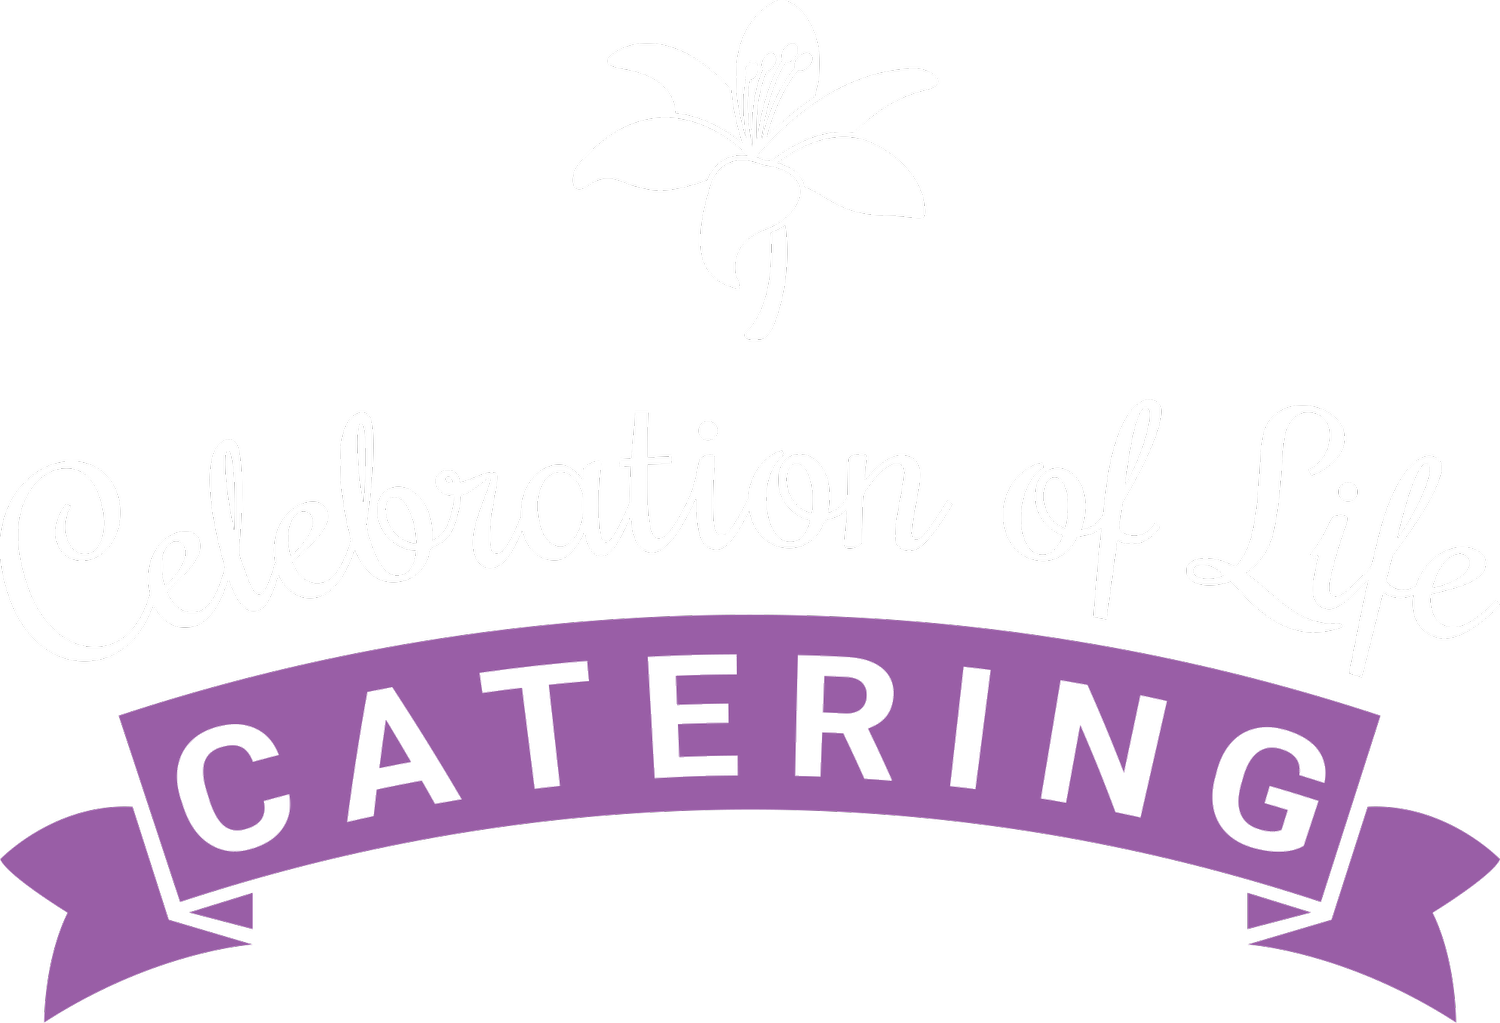 Celebration of Life Catering